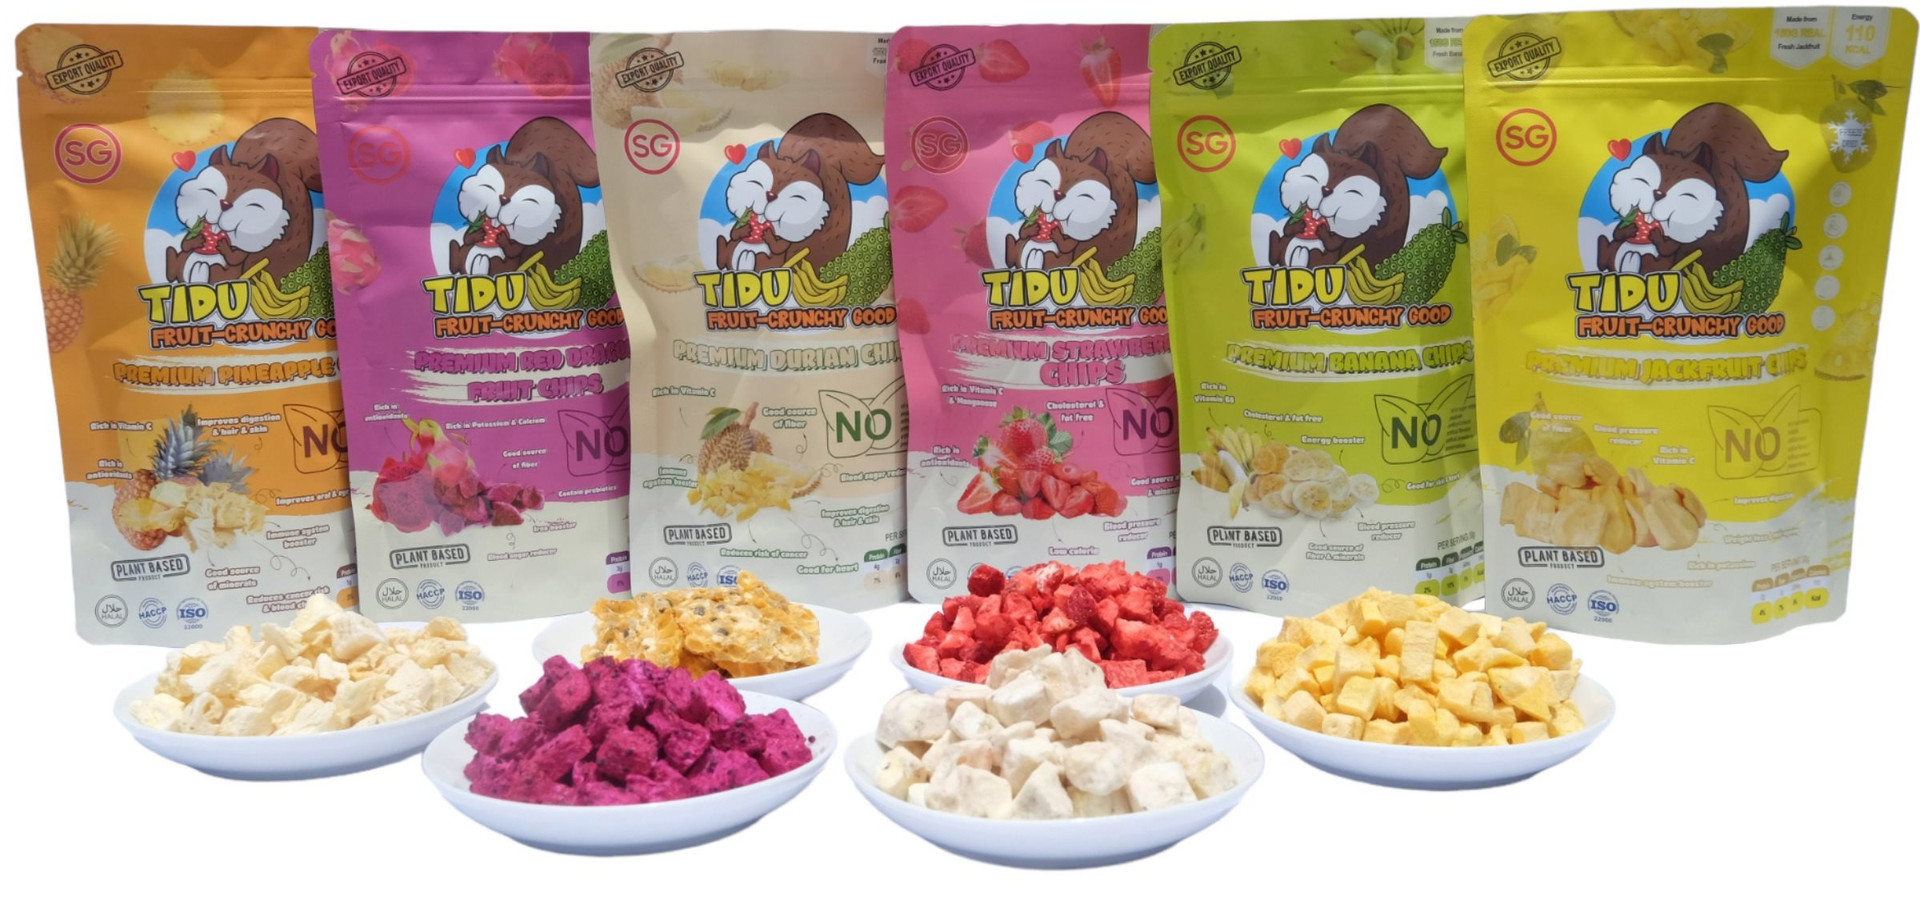 hinh-anh-sp-2-freeze-dried-food-vn(1).jpg